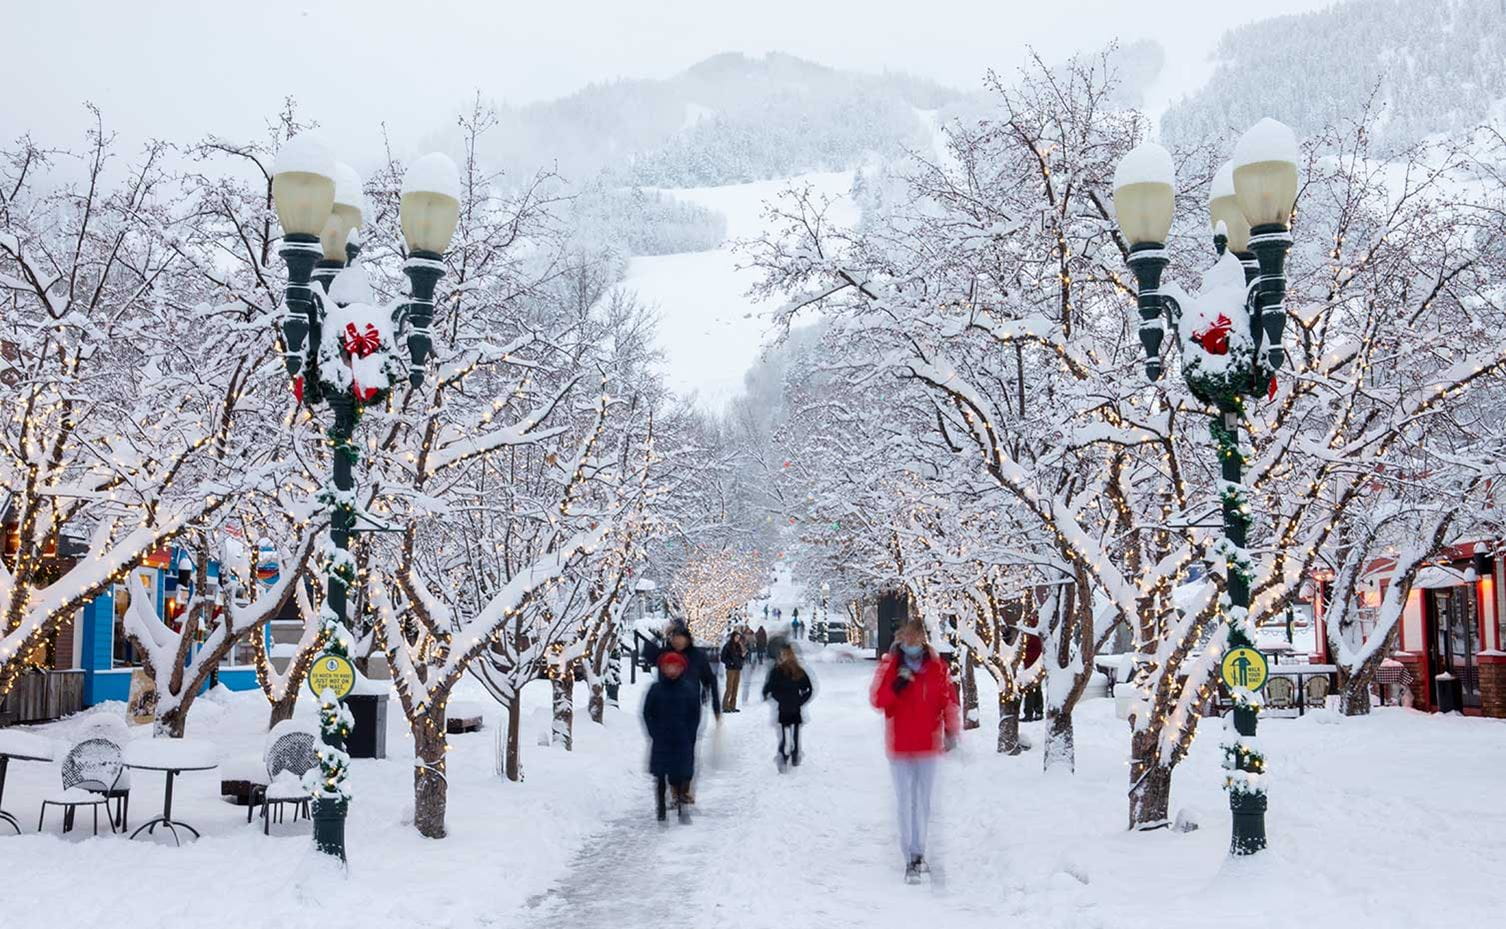 Downtown Aspen on a snowy afternoon during December